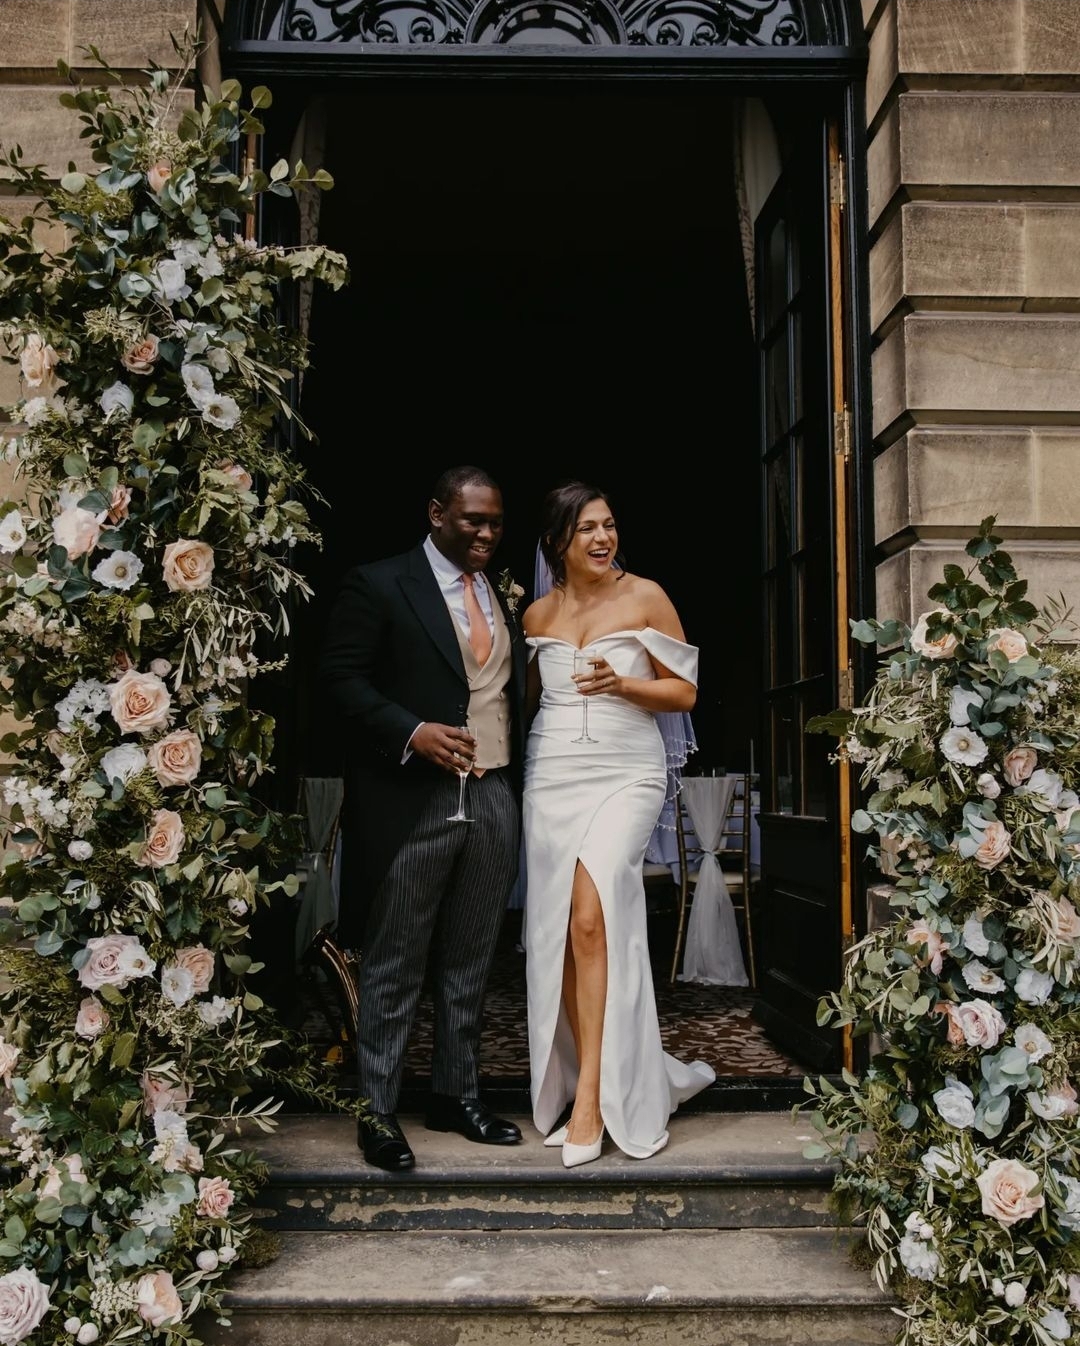 Wedding Flowers from Yorkshire Floral Co